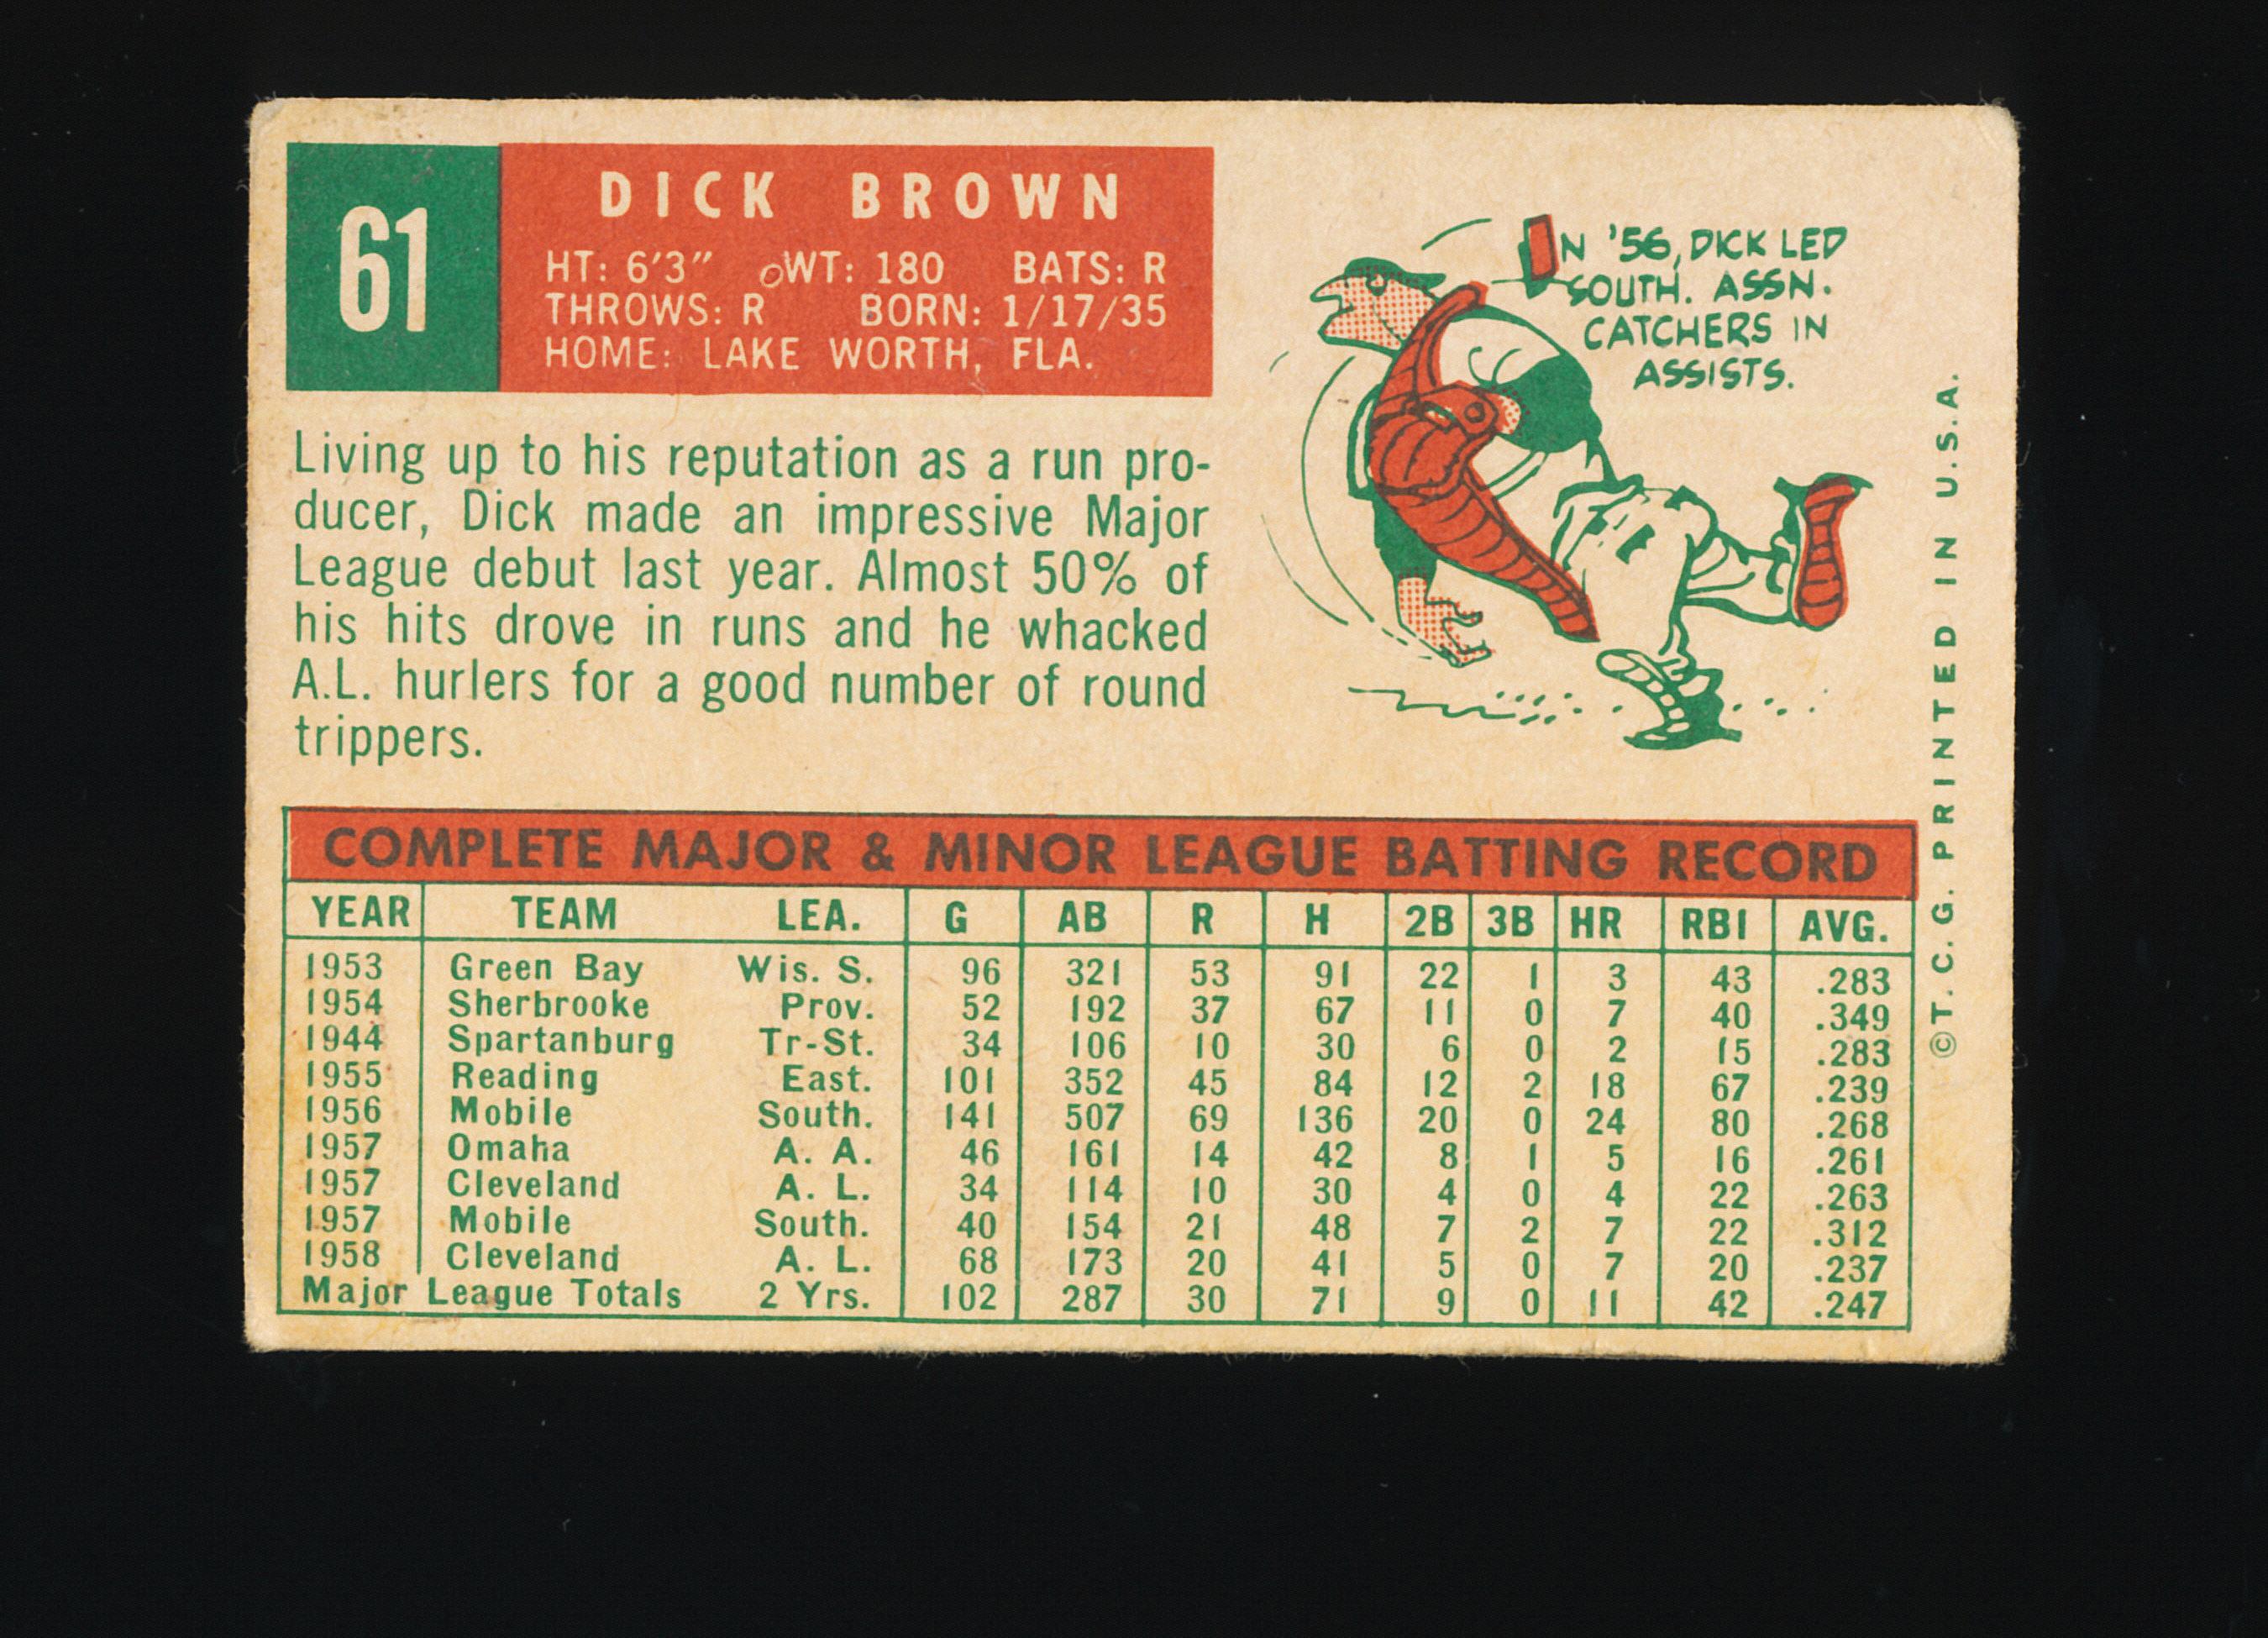 1959 Topps Baseball Card #61 Dick Brown Cleveland Indians